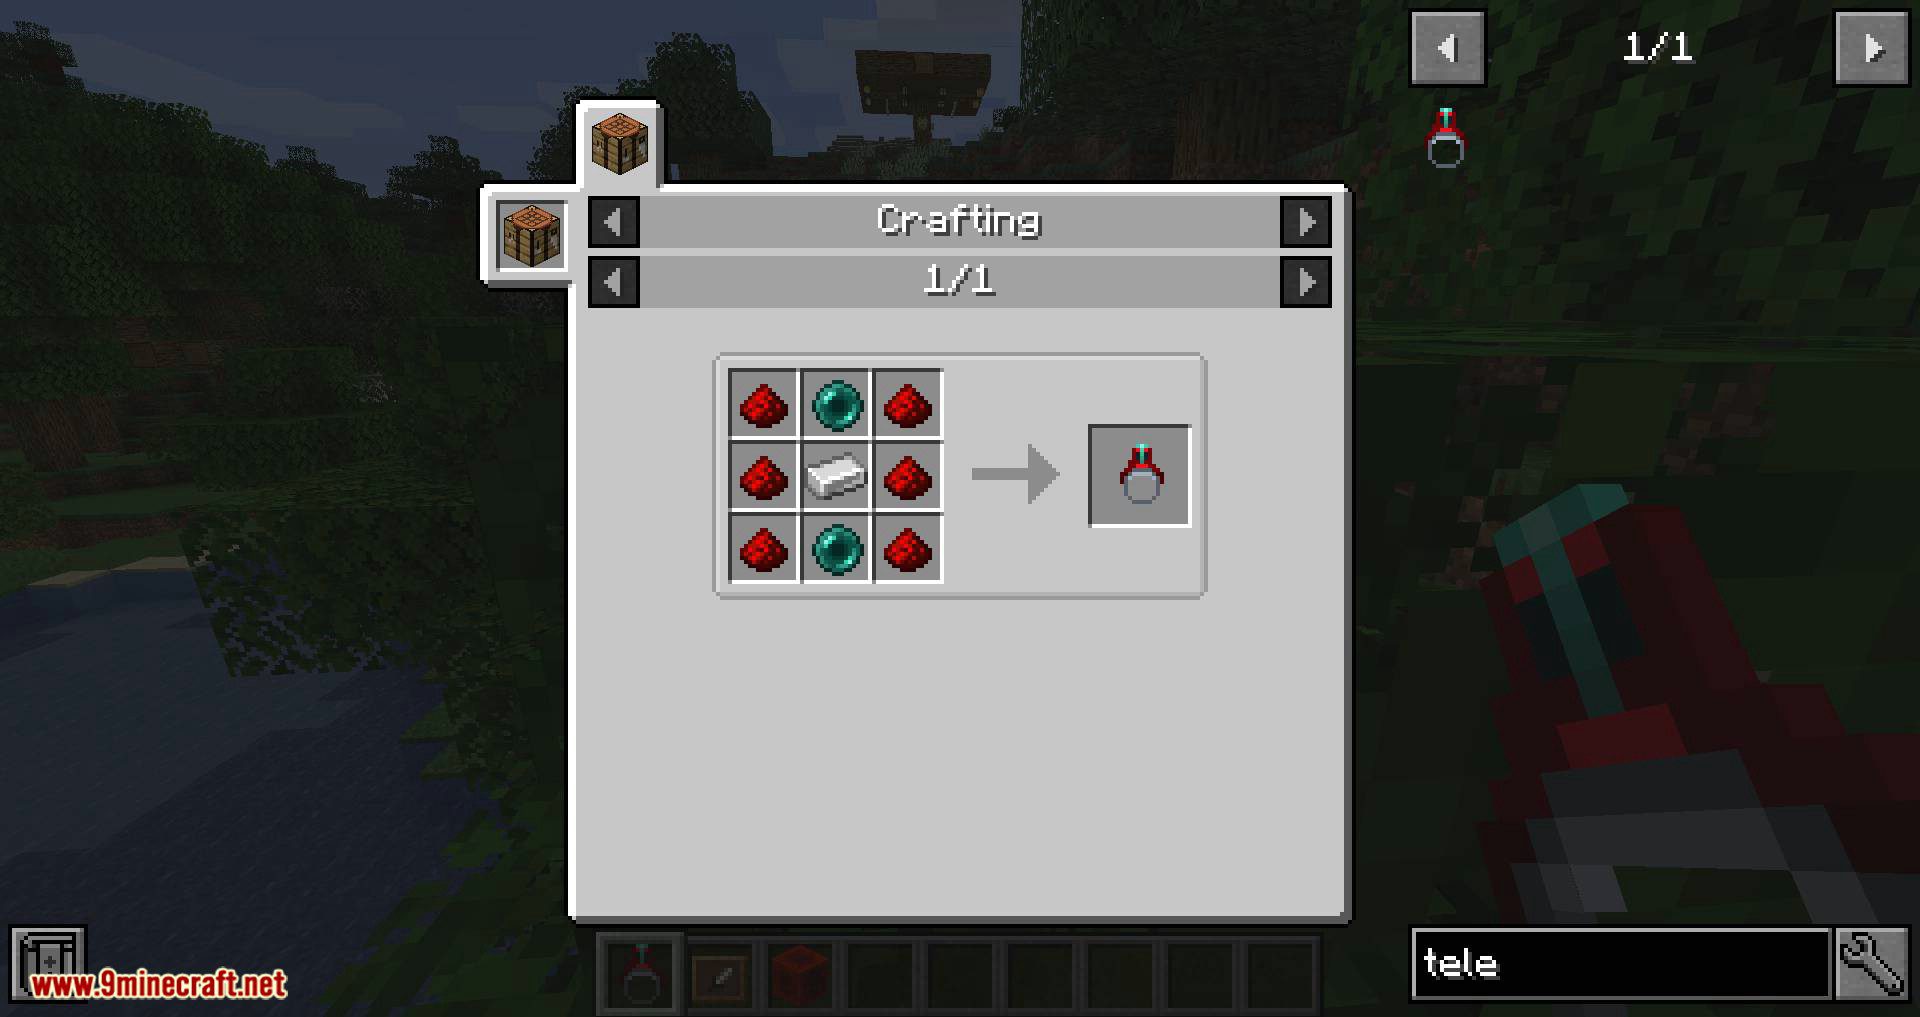 Ring Of Teleport Mod 1 16 3 1 15 2 Teleport To A Stored Location Reusable 9minecraft Net